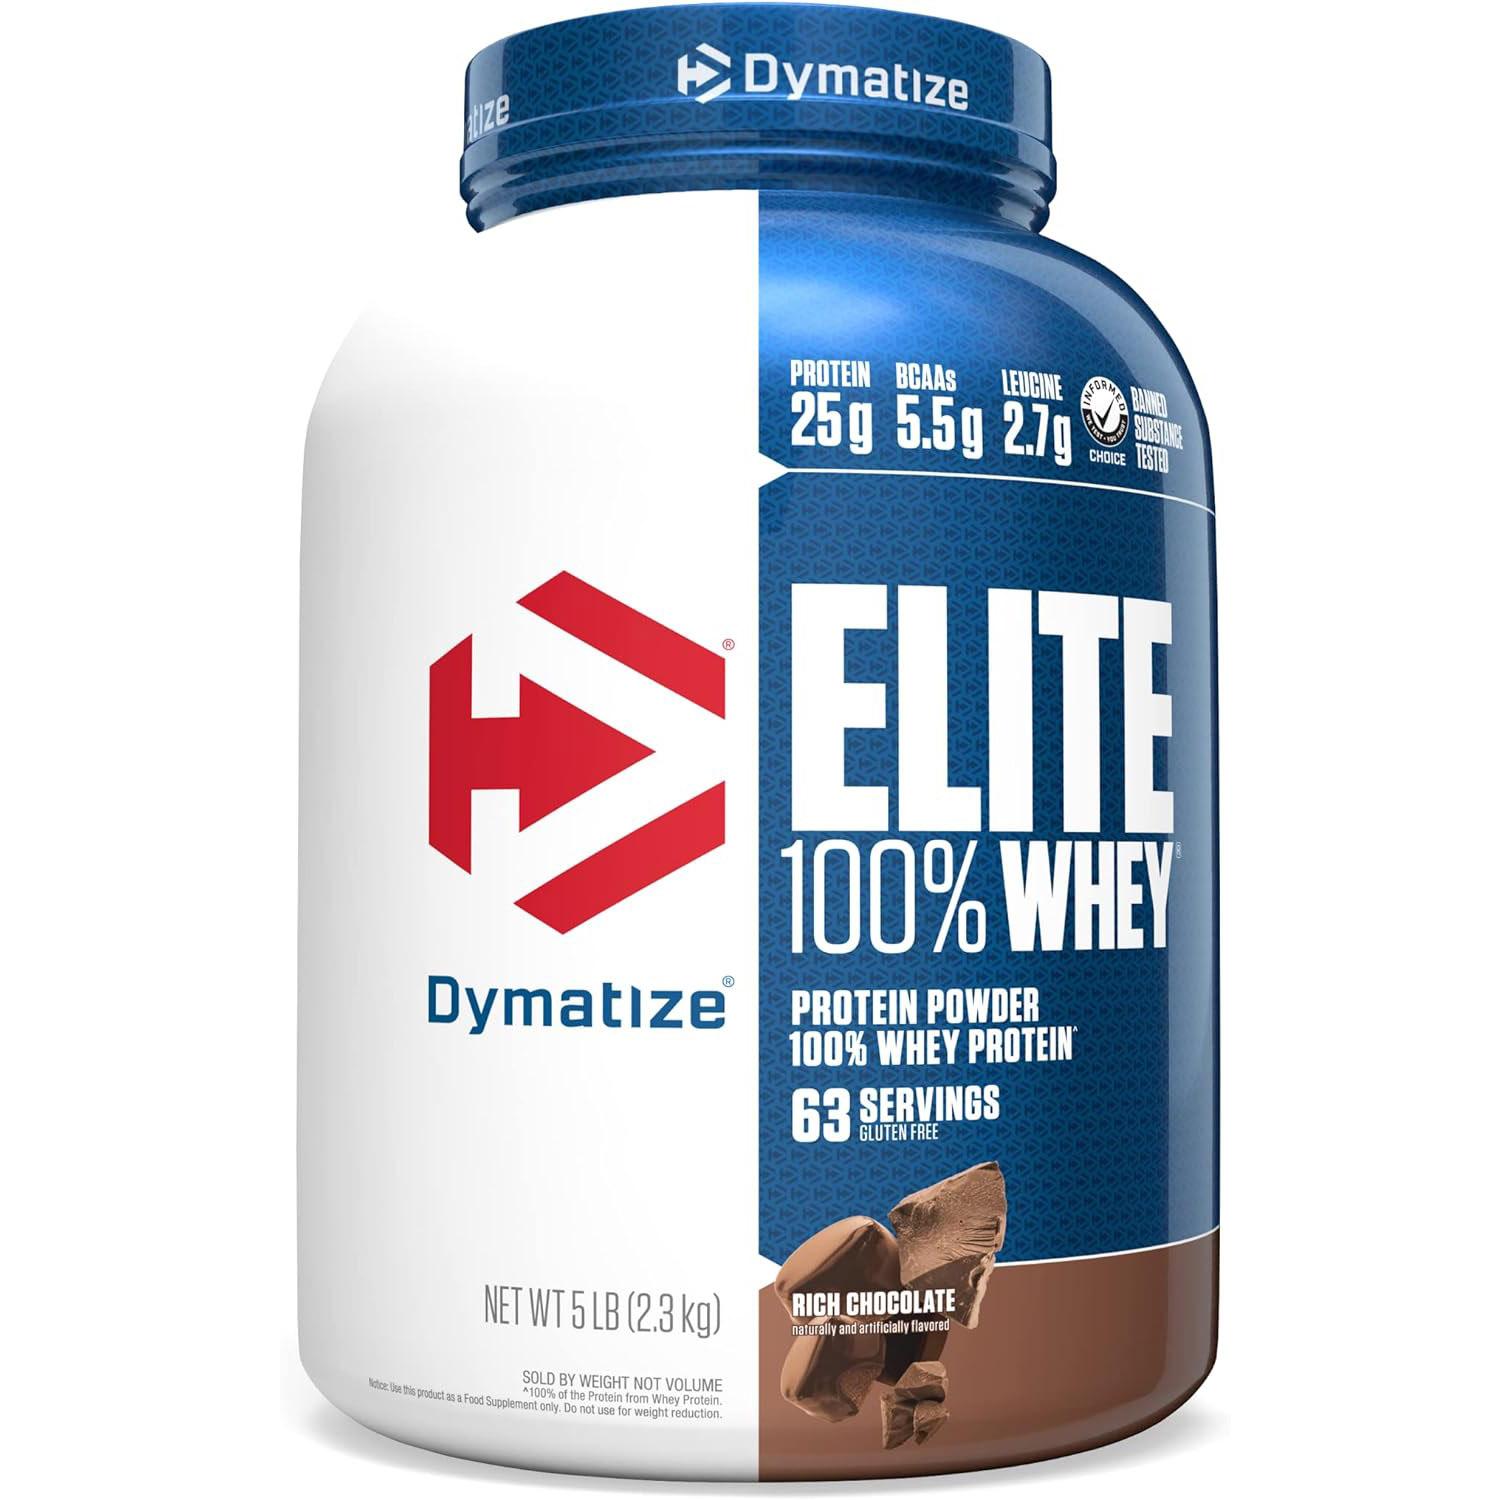 Dymatize Elite Whey Protein Powder Rich Chocolate for $42.74 Shipped